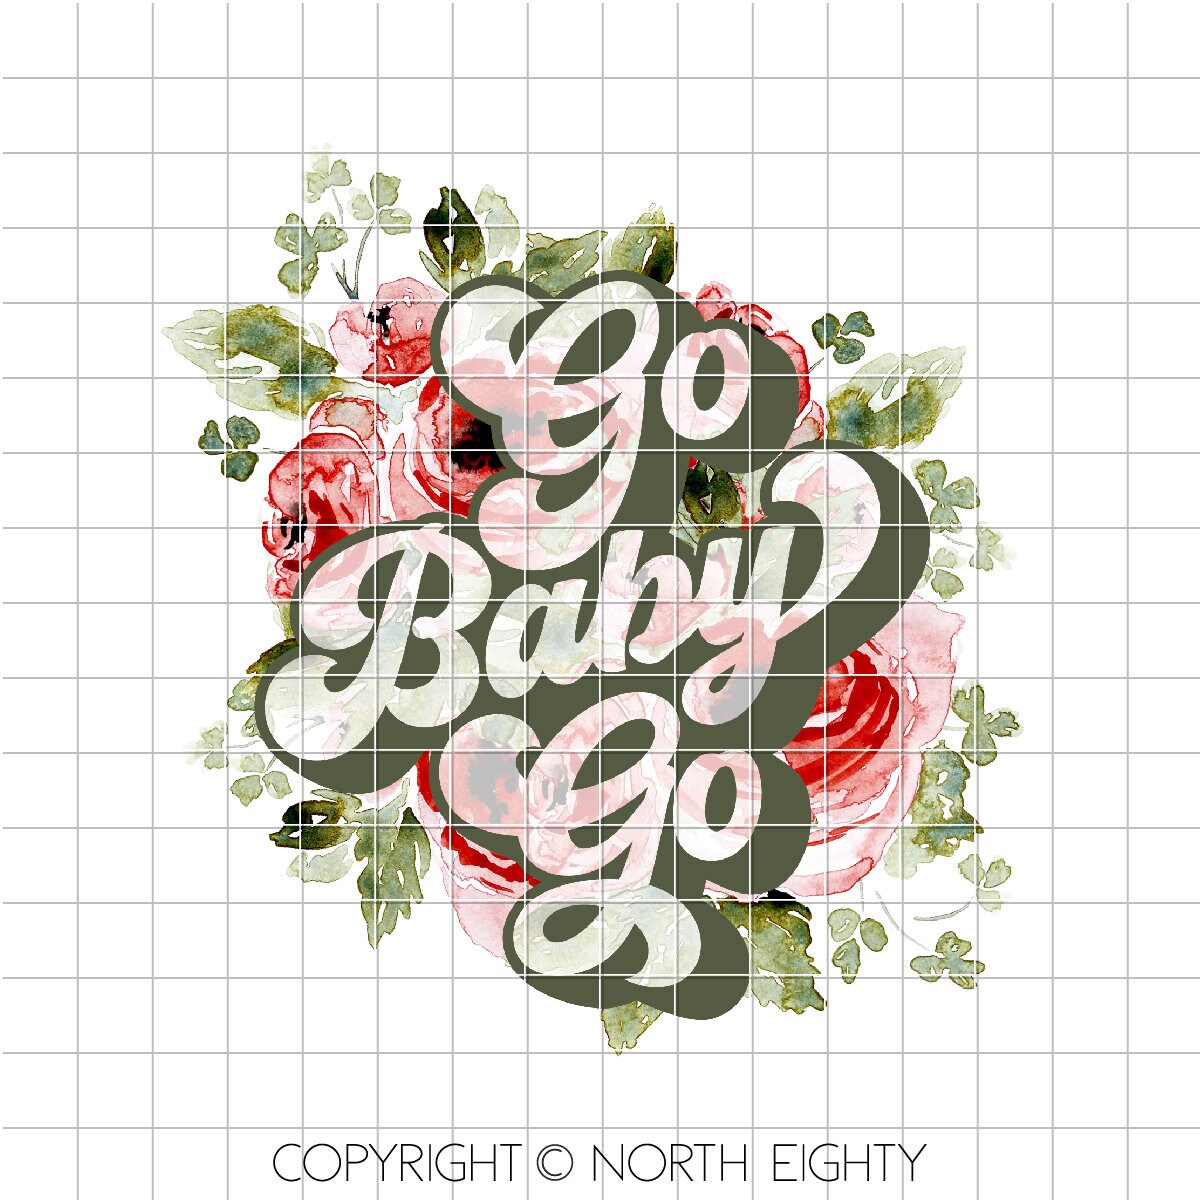 Derby png - Kentucky Derby - Roses - Watercolor floral - Sublimation - Waterslide - Derby Design - Horse Racing - Derby - Go Baby Go